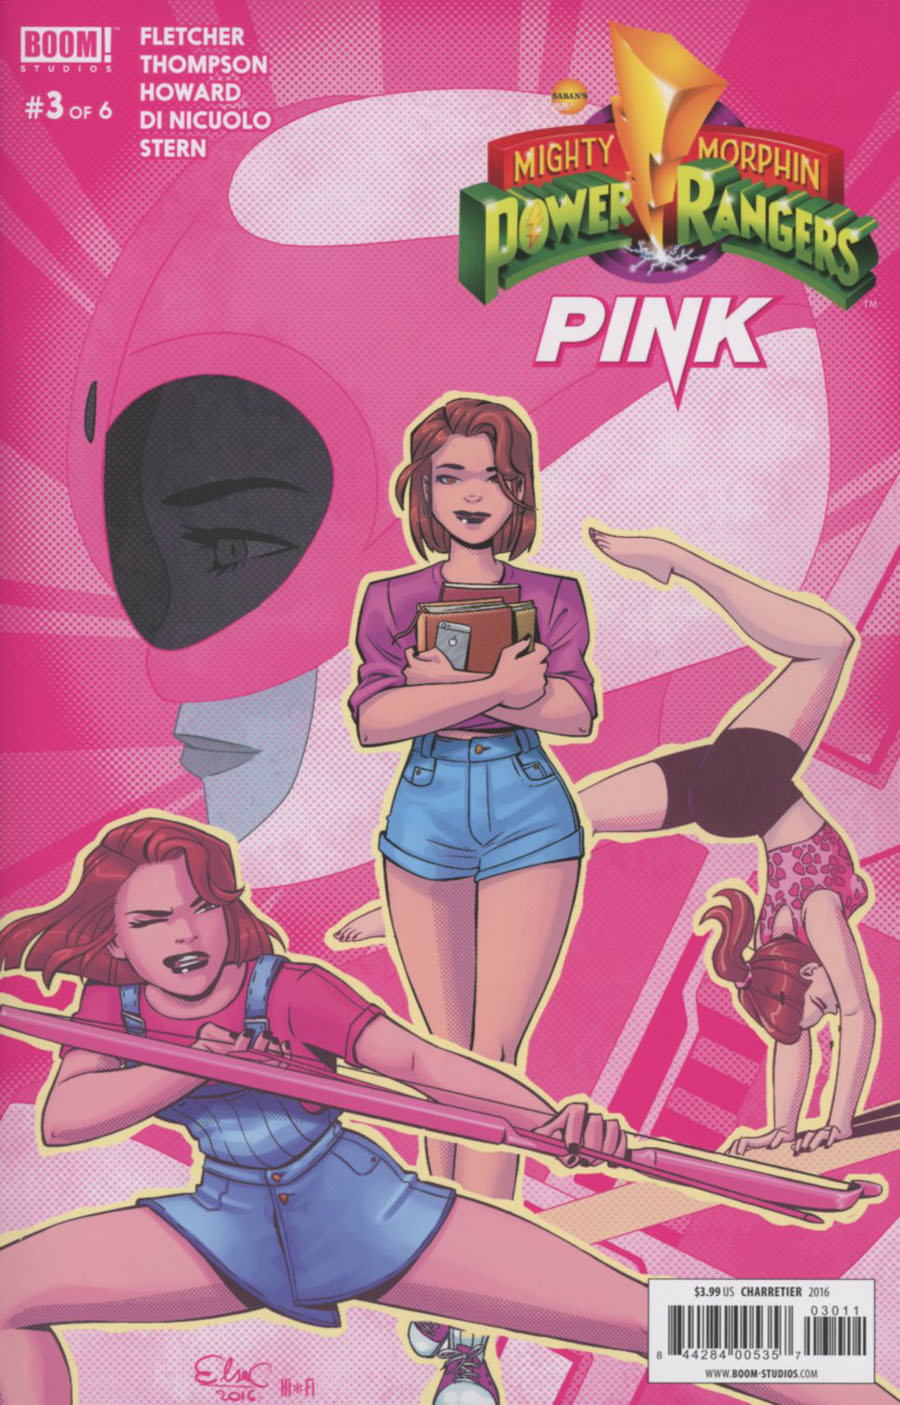 Mighty Morphin Power Rangers Pink #3 Cover A Regular Elsa Charretier Cover